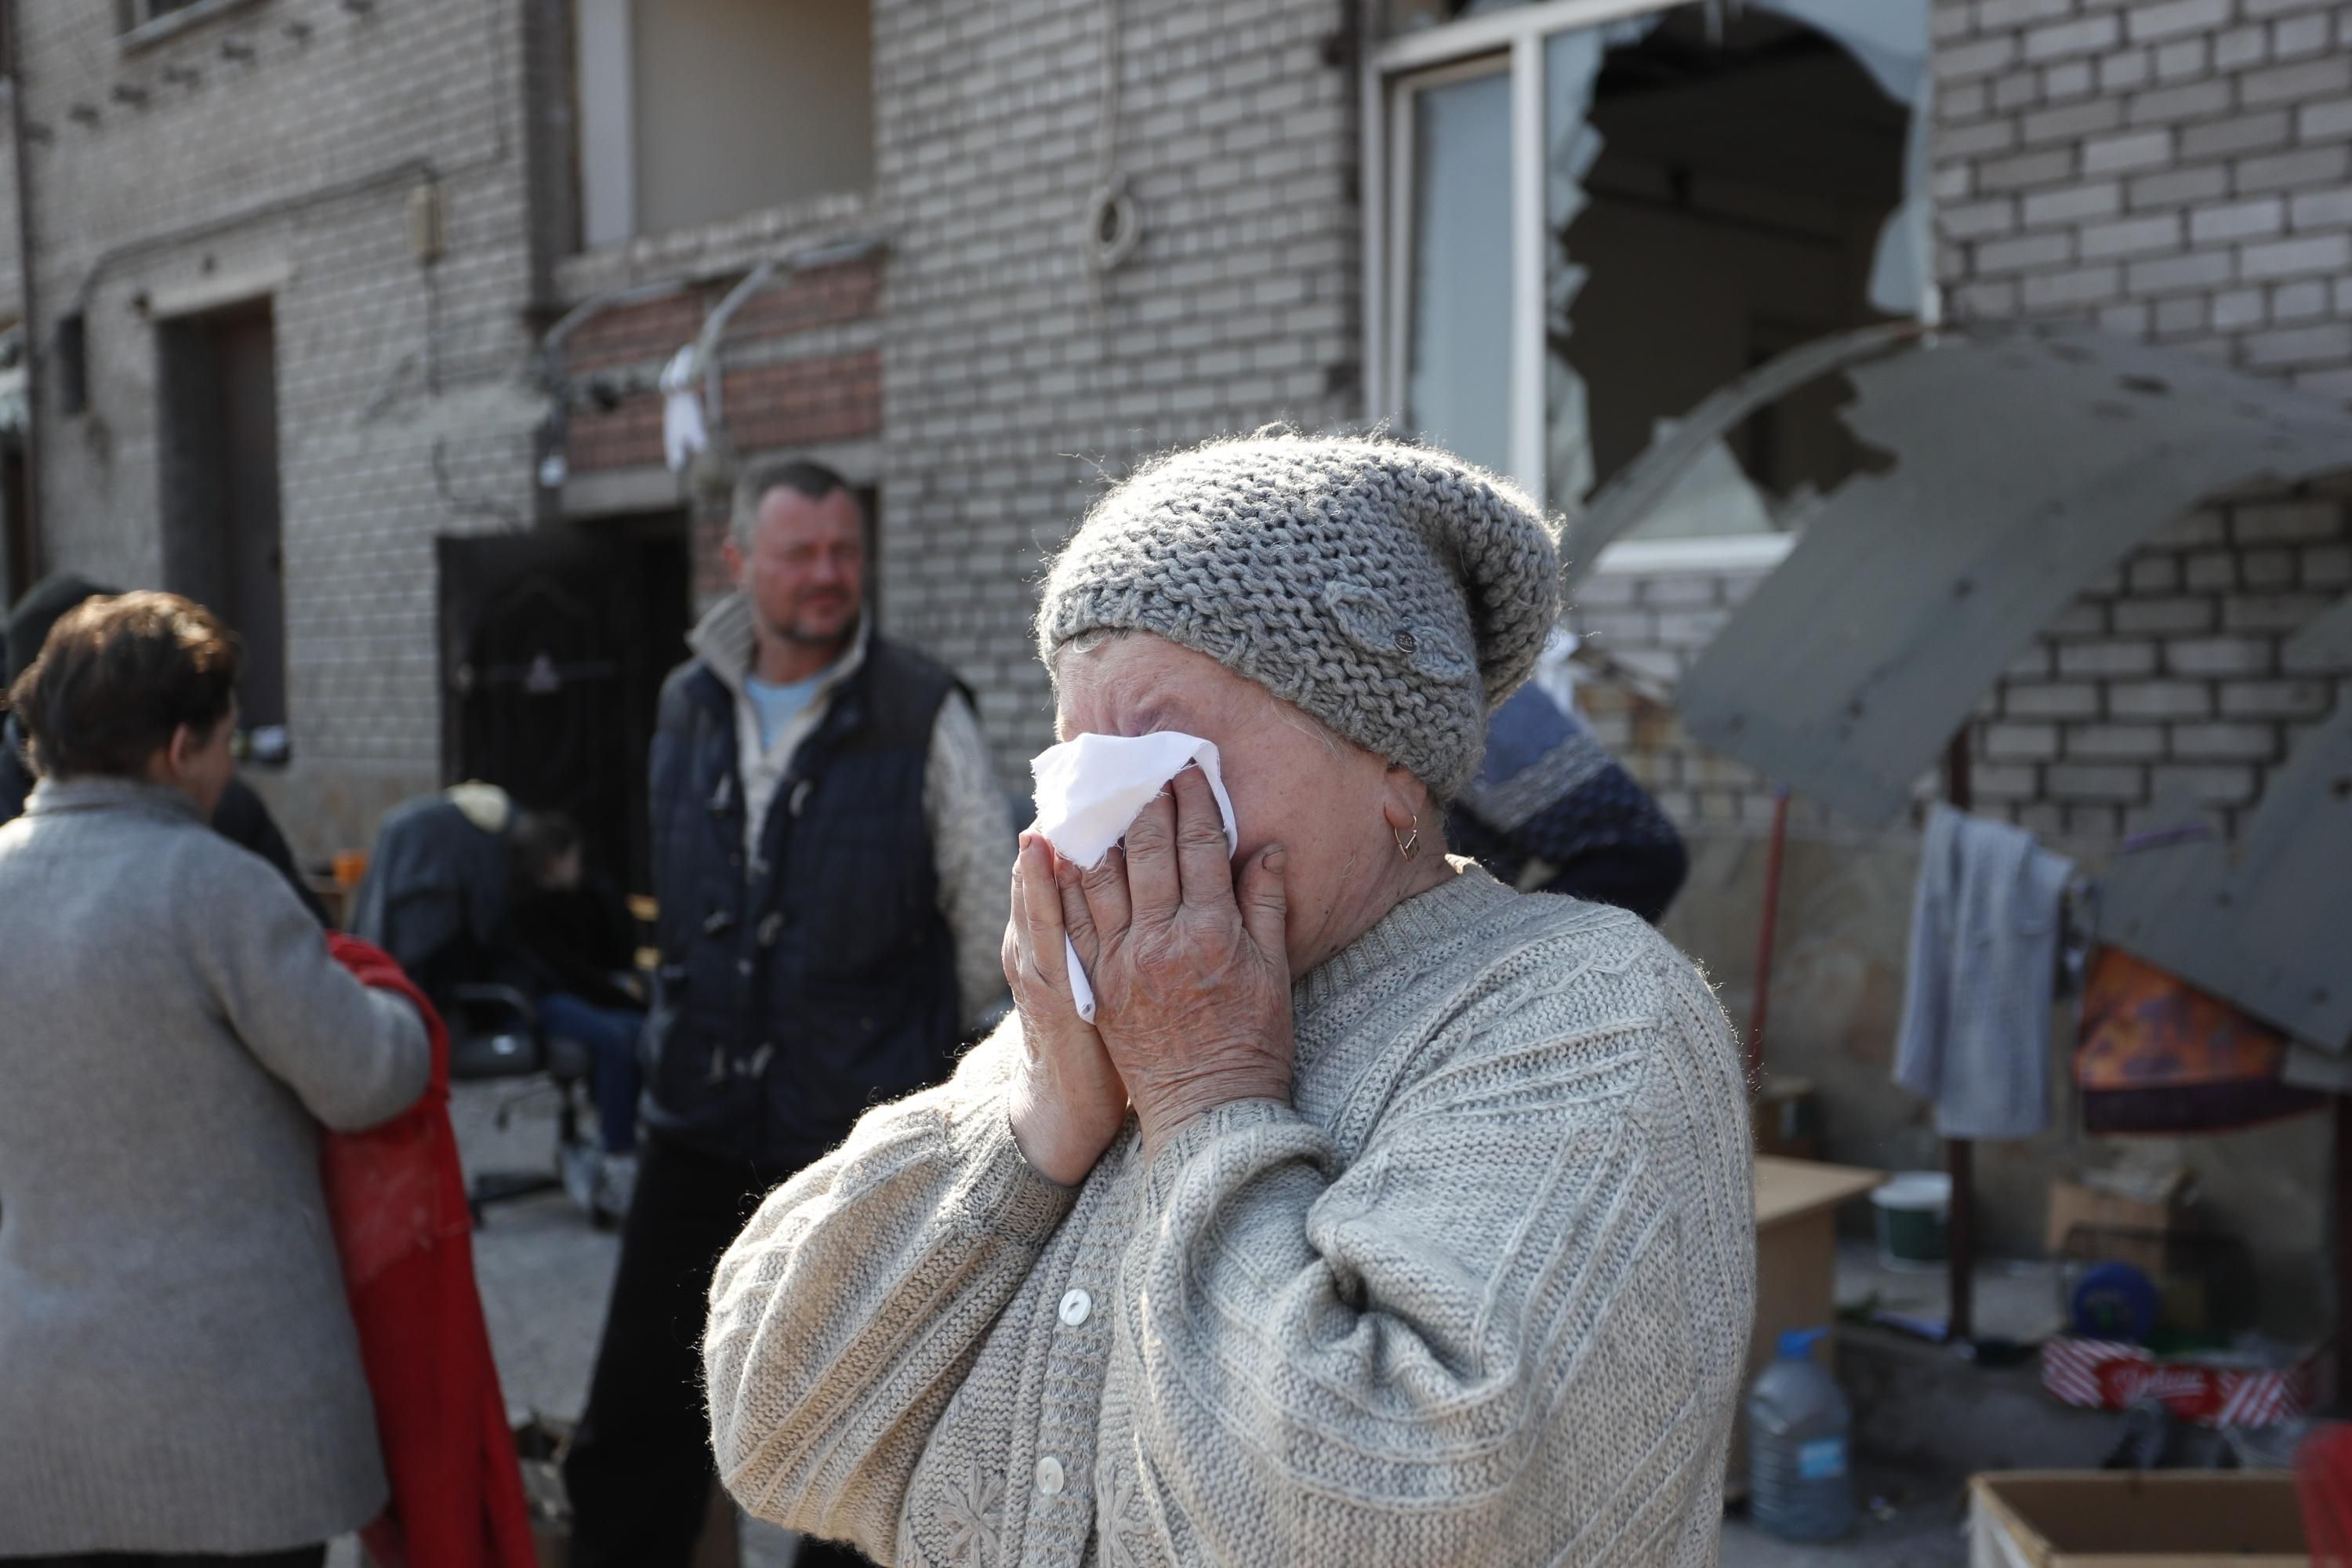 Mariupol residents are seen in the city